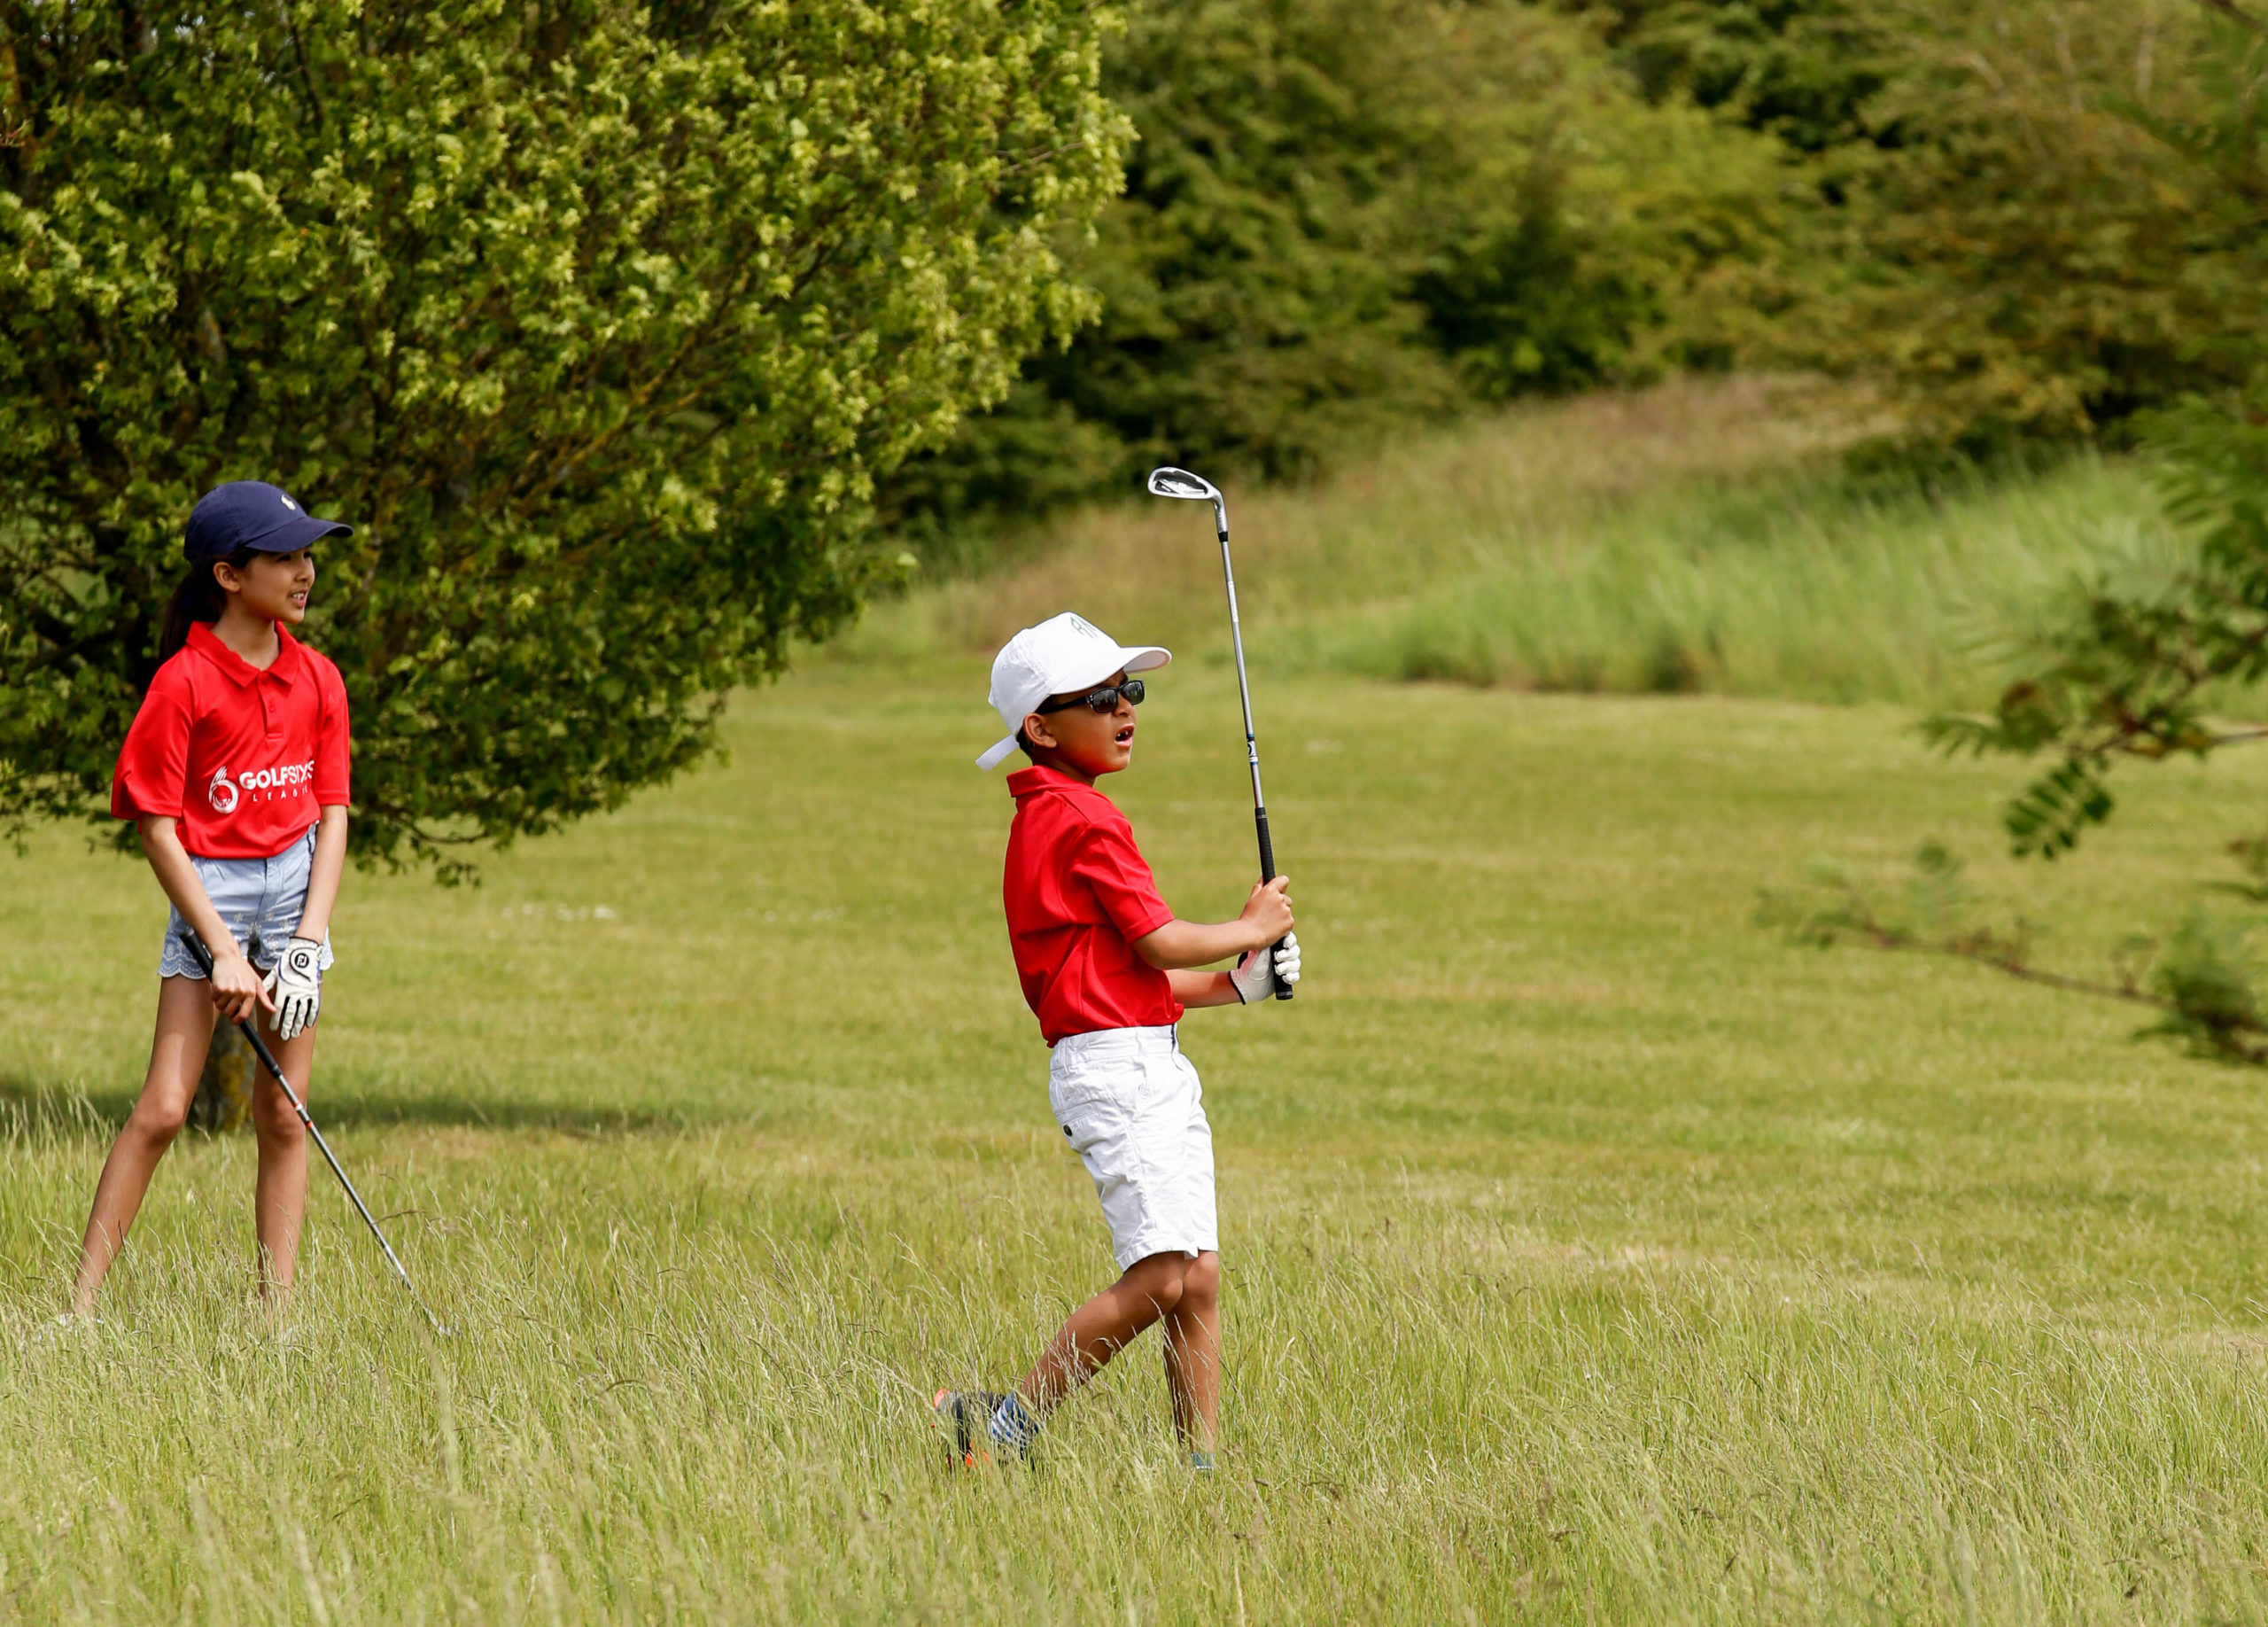 Golf Foundation at Chesfield Downs